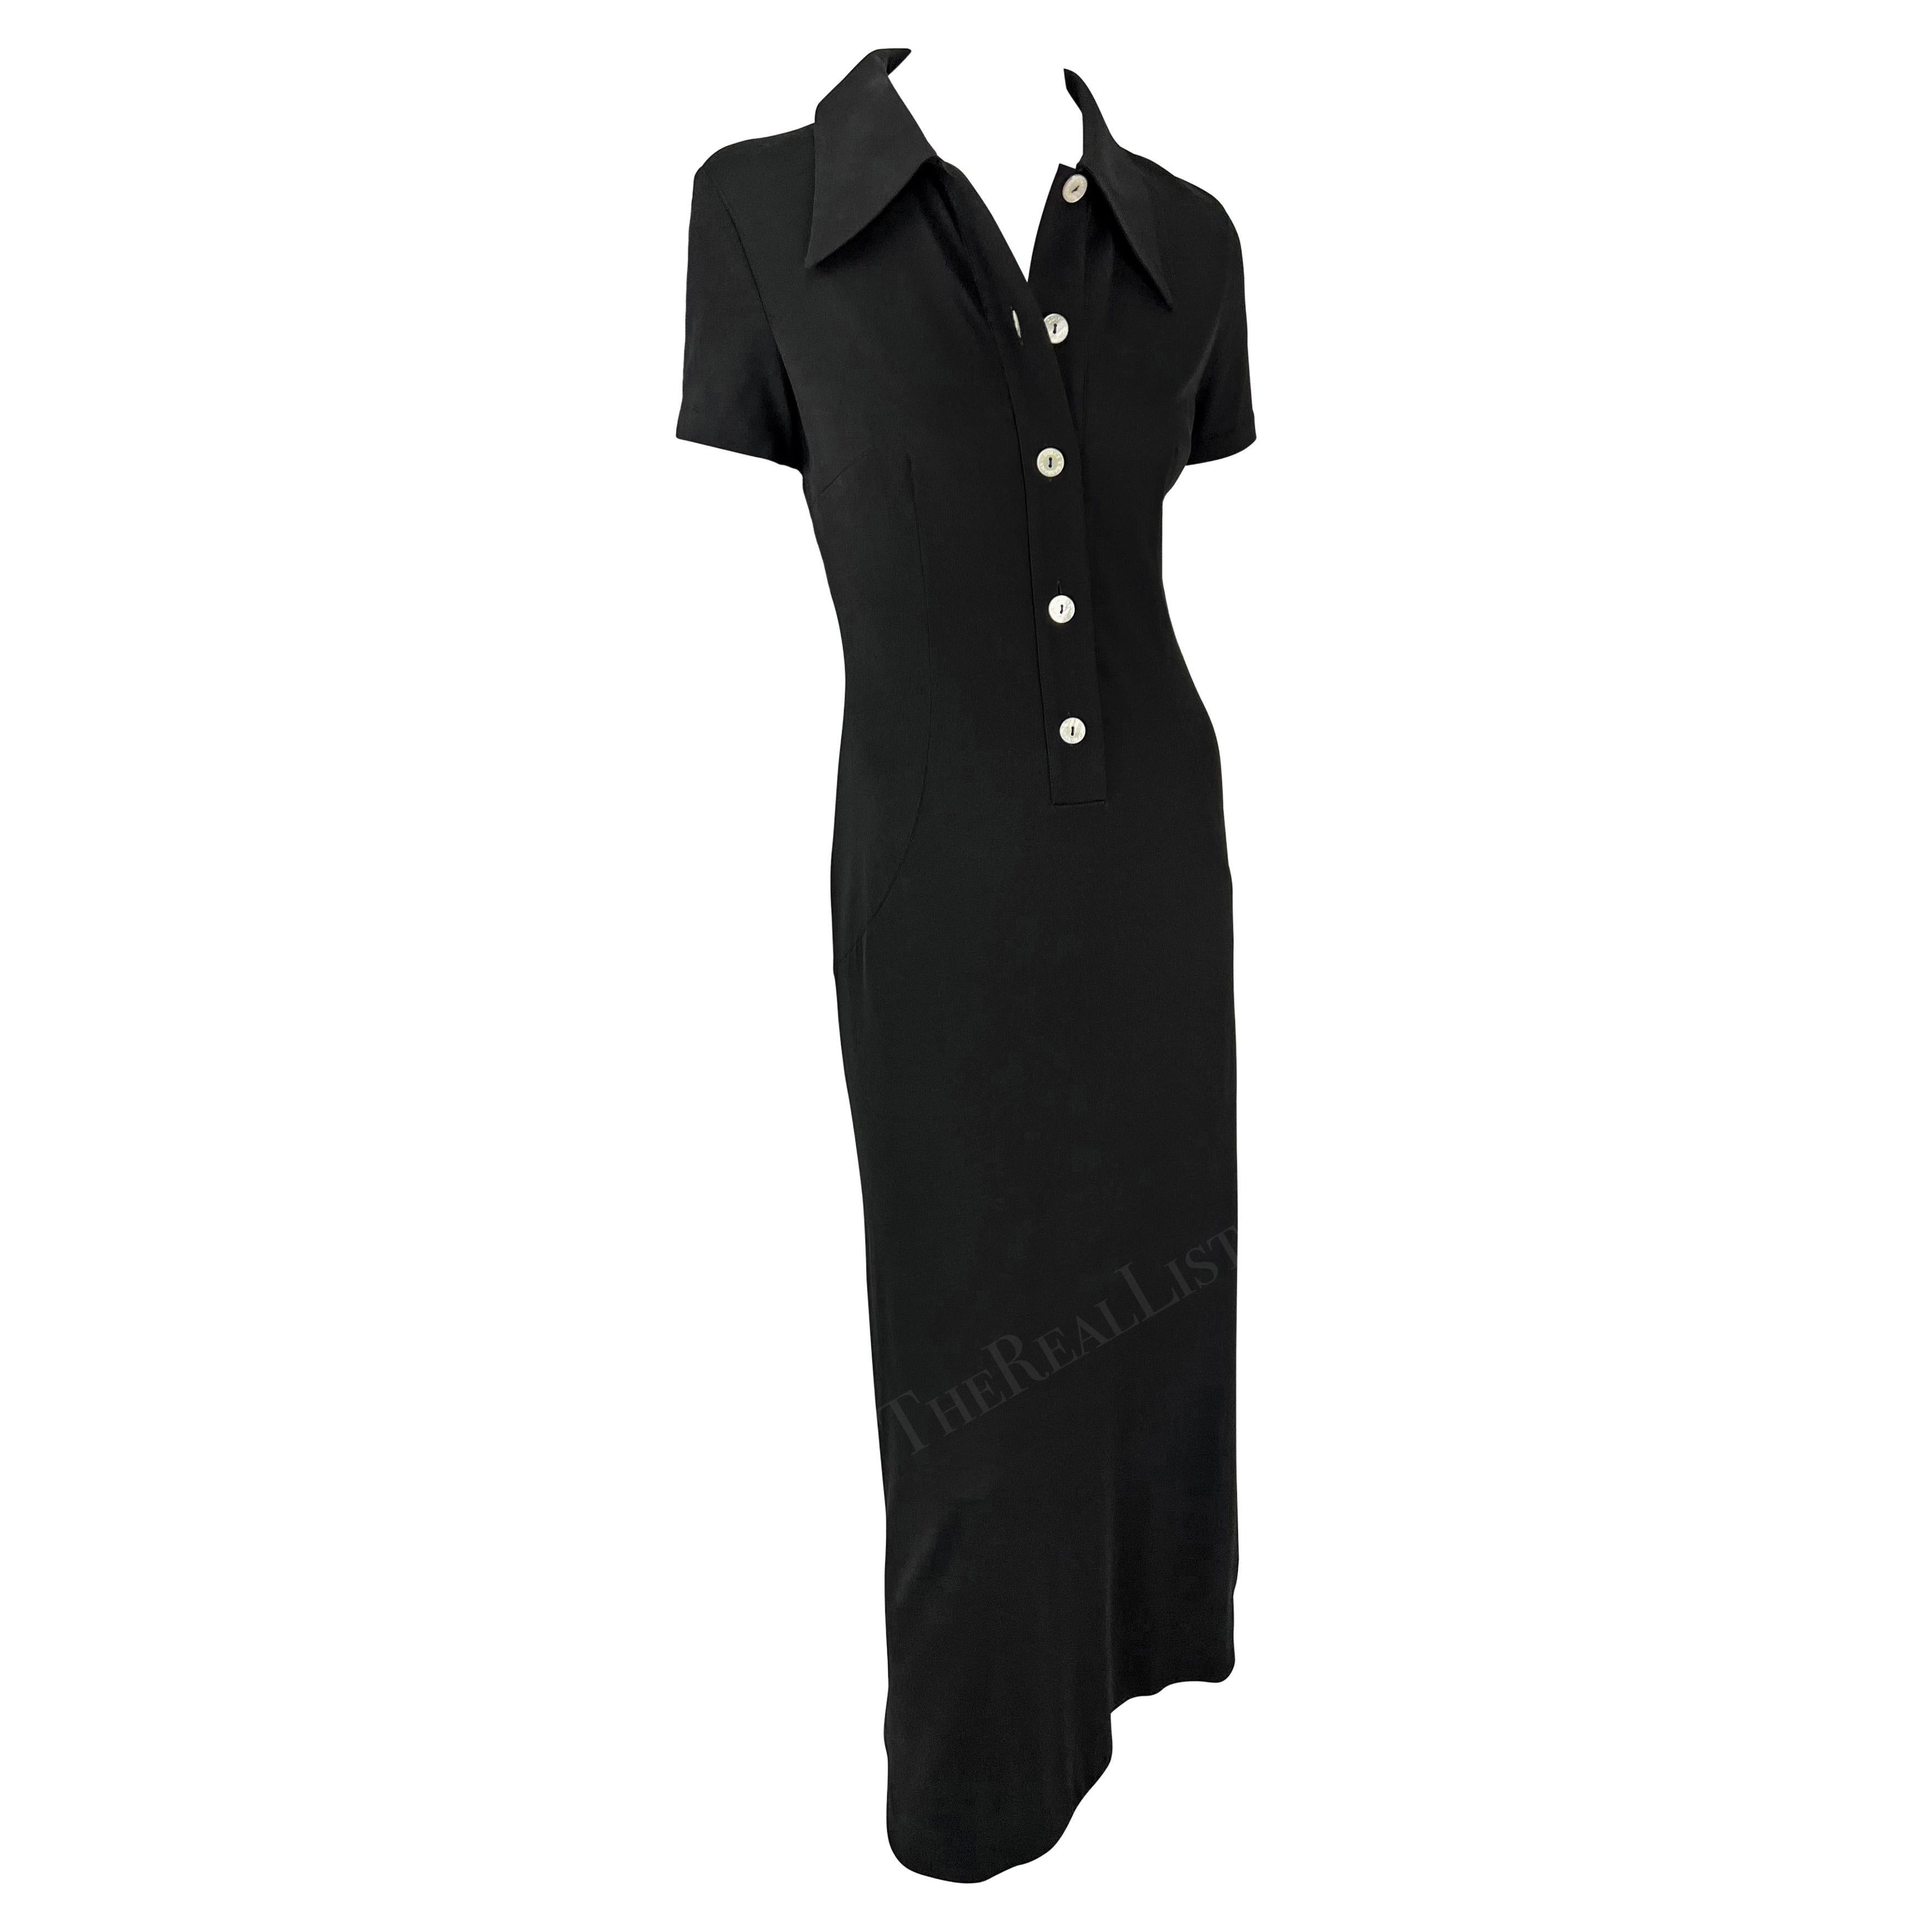 S/S 1996 Dolce & Gabbana Runway Black Collared Plunge Button Maxi Dress For Sale 3